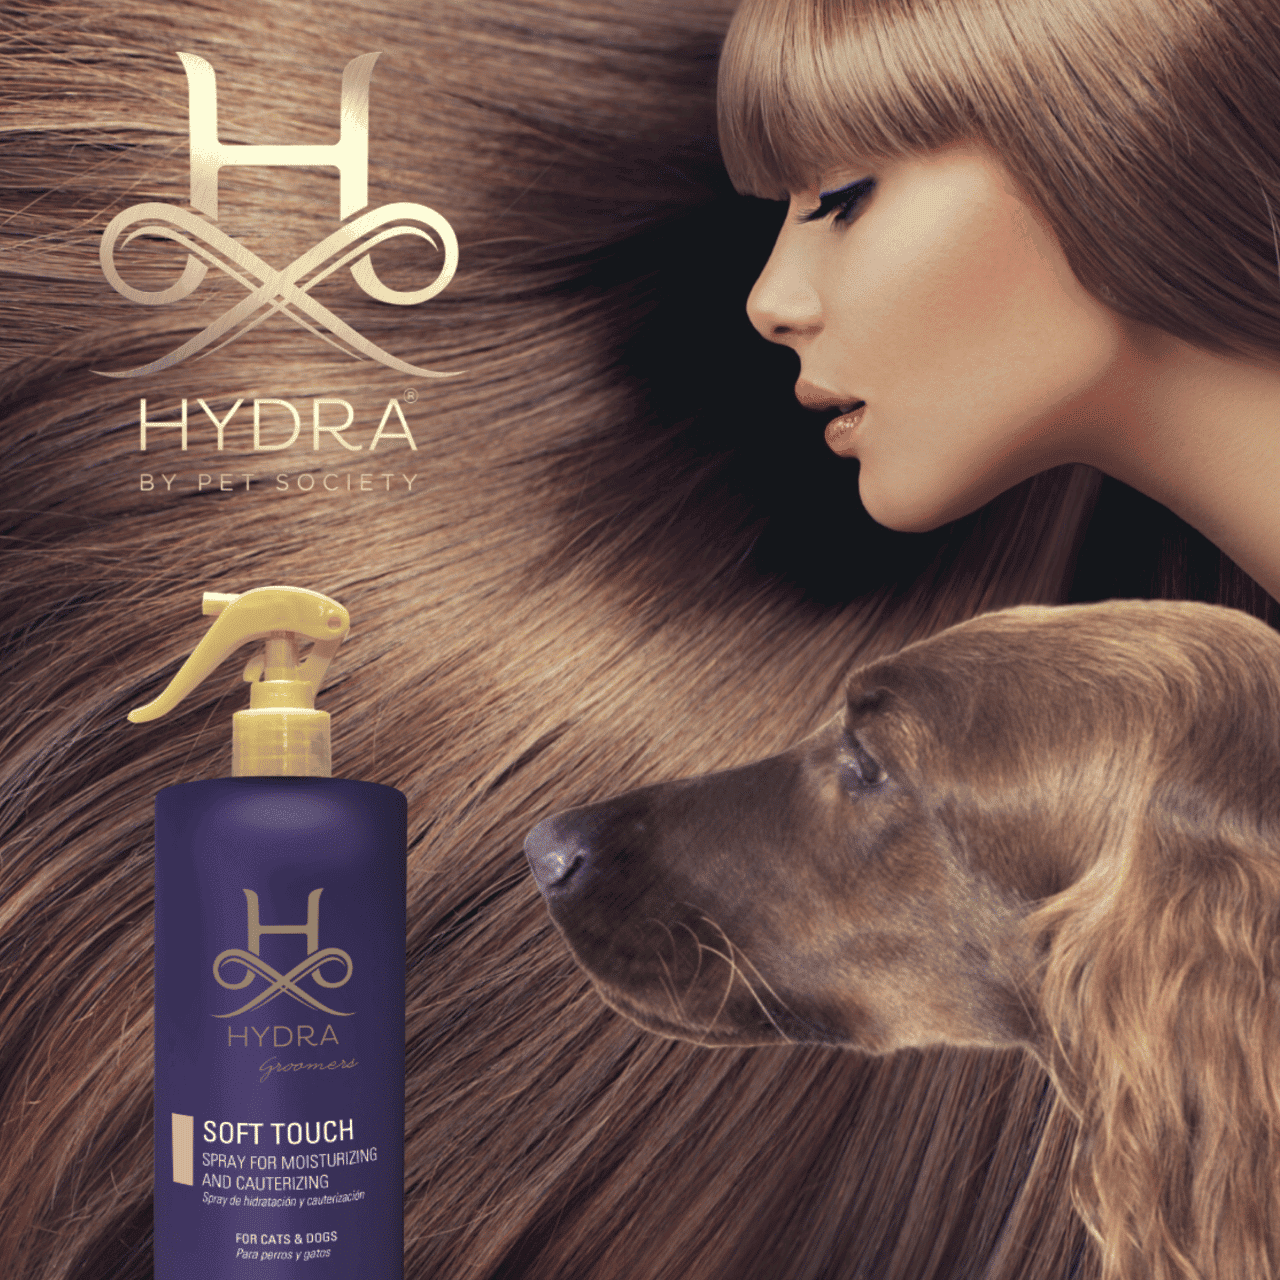 hydra groomers soft touch 500ml p - Busca na MBS PRO GROOMING